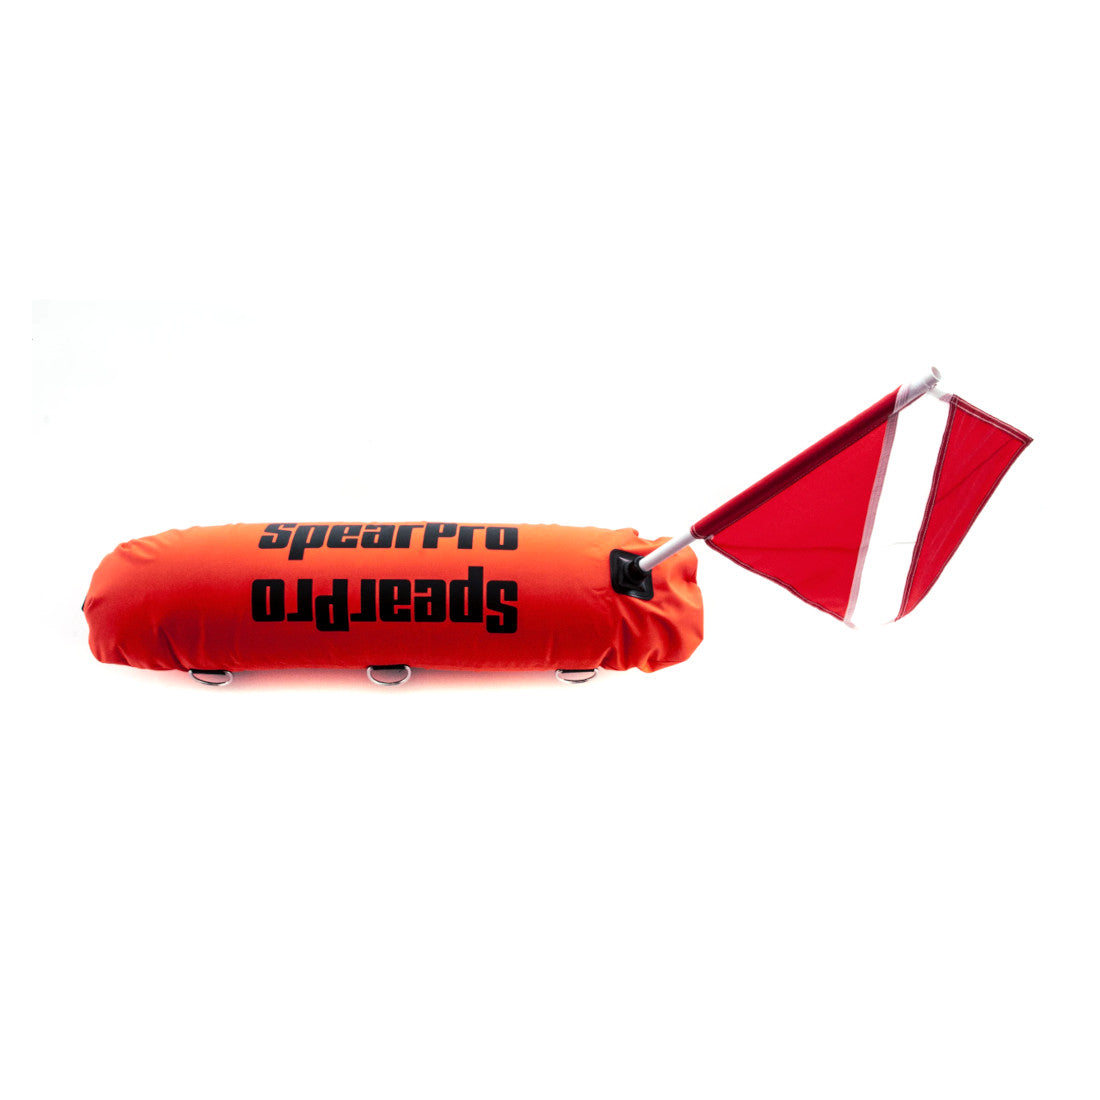 SpearPro Float Torpedo Reinforced with Stainless Rings Spearfishing Dive Signal Marker Buoy SMB Floats - Orange